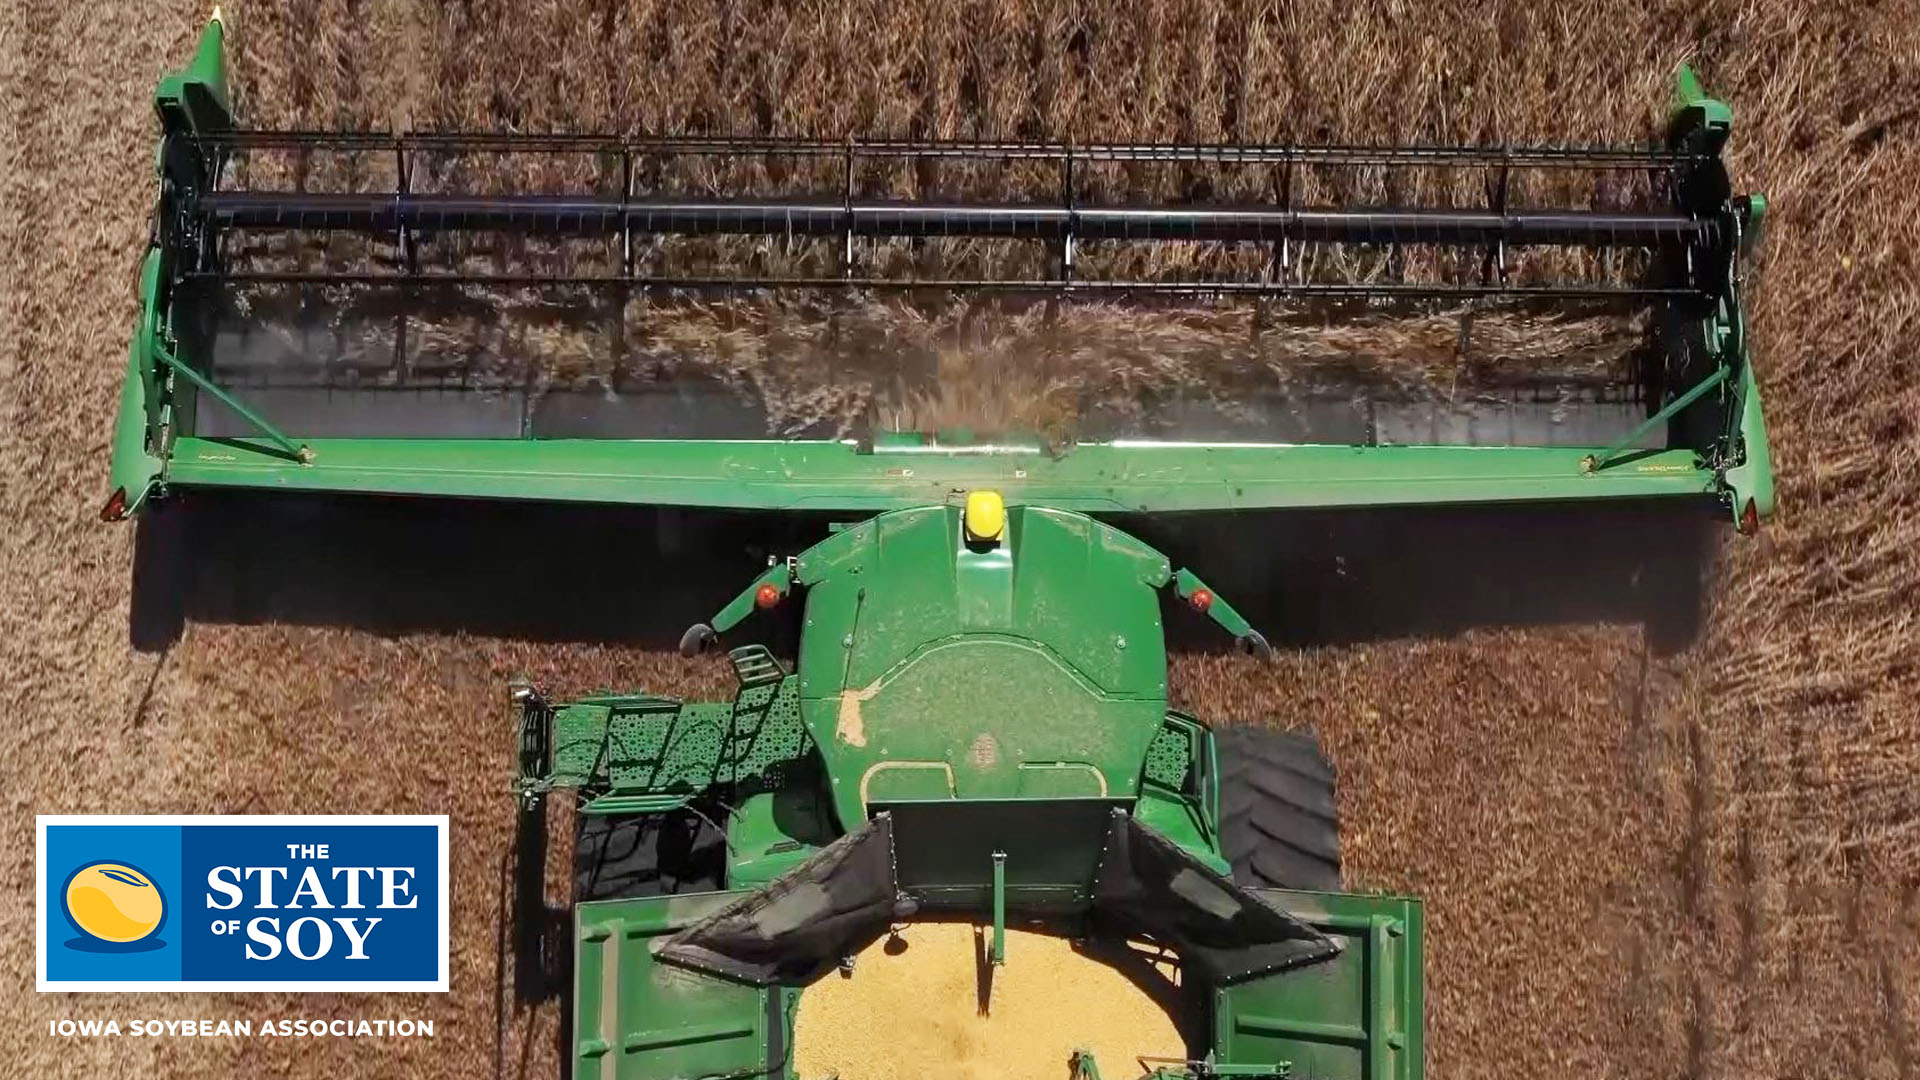 Aerial photo of combine harvesting soybeans